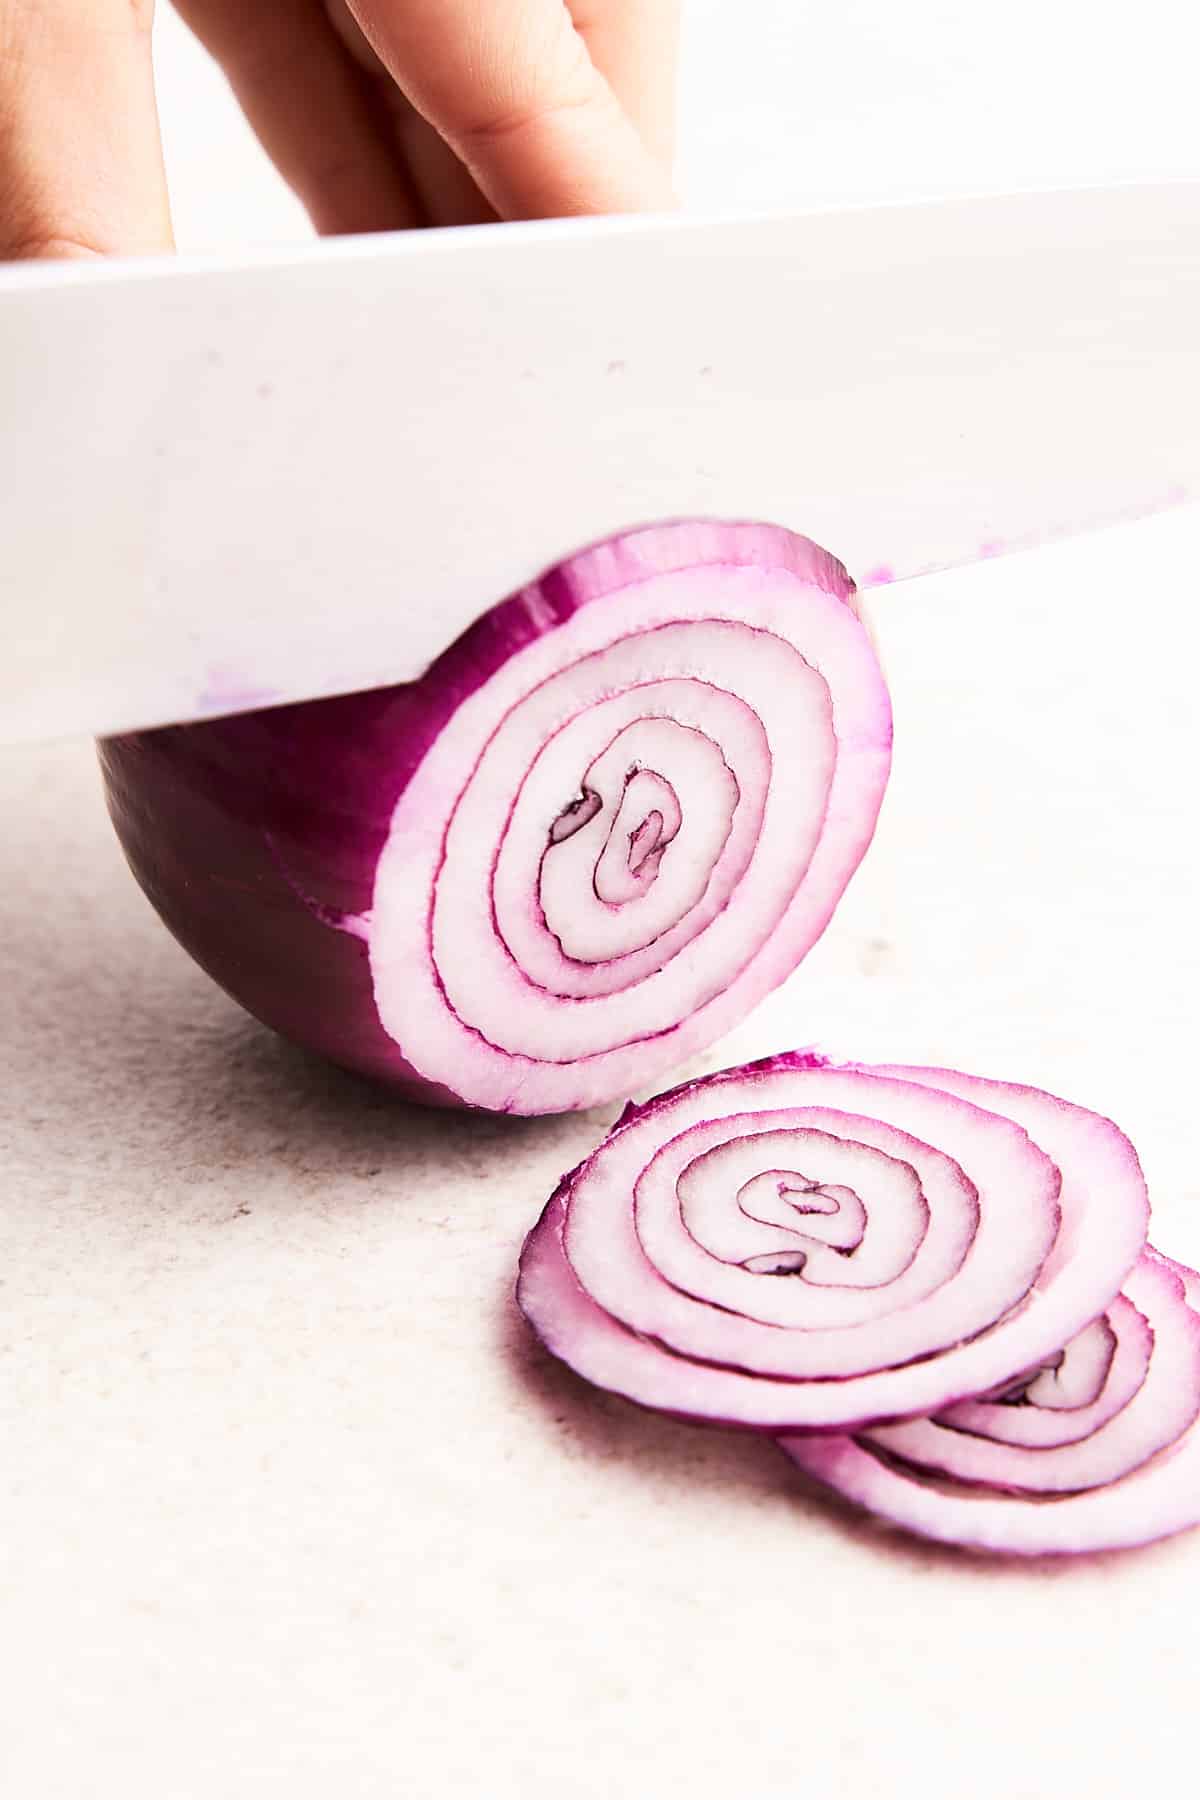 Slicing an onion into rings.